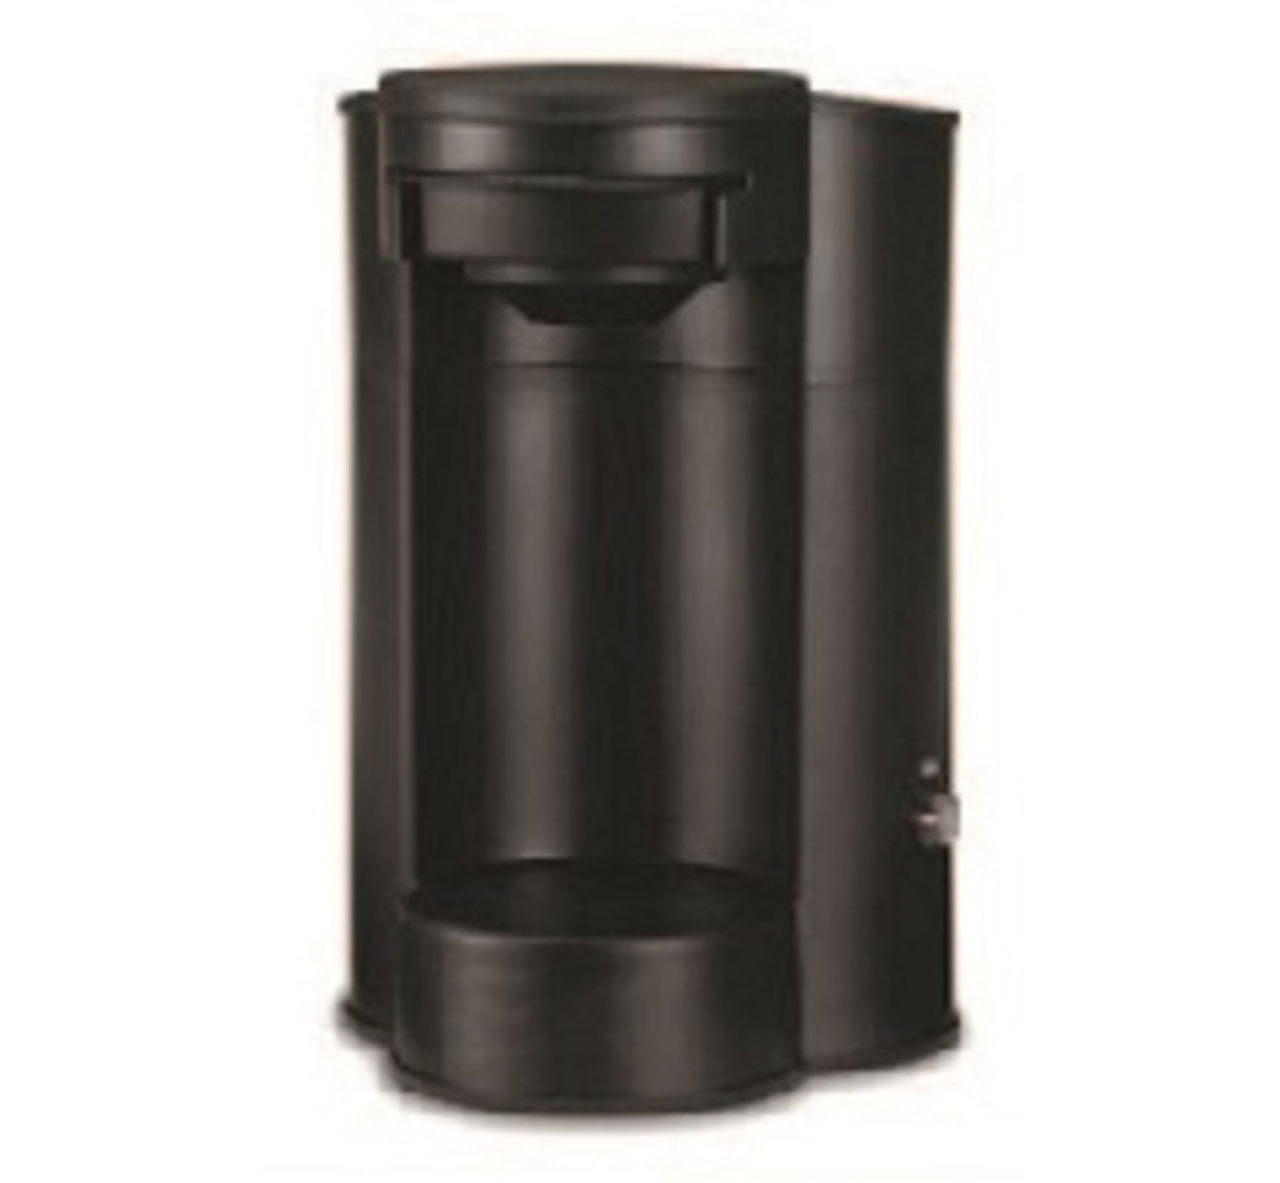 What type of filter does the Pavy coffee maker use?